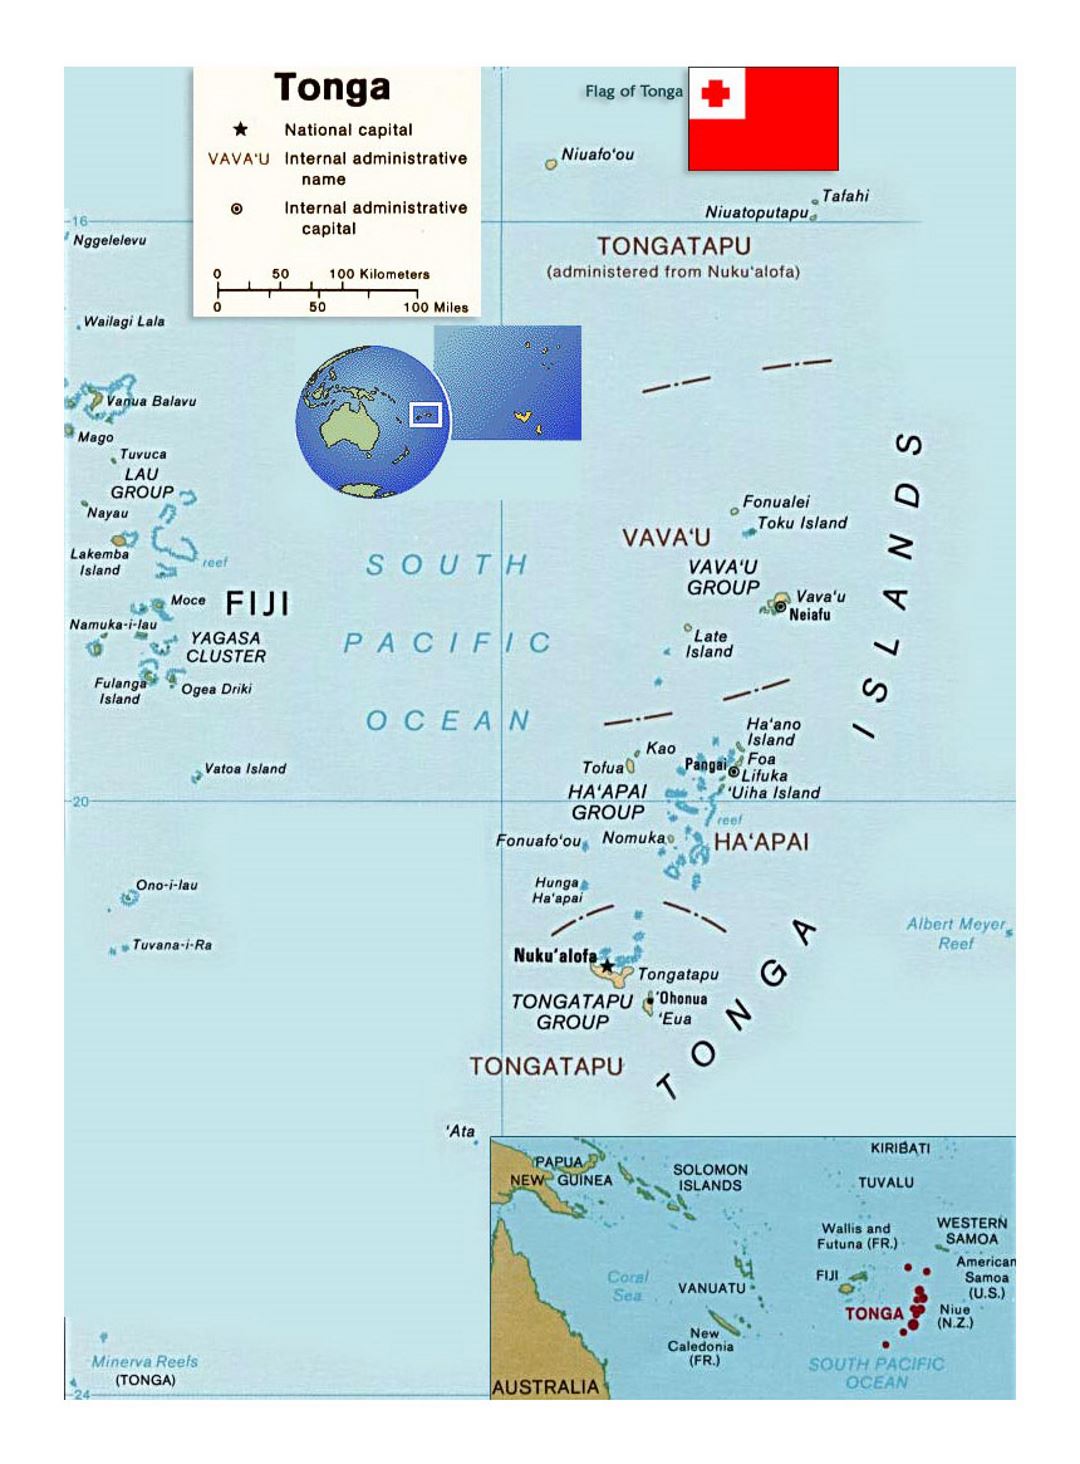 Detailed political map of Tonga with island names